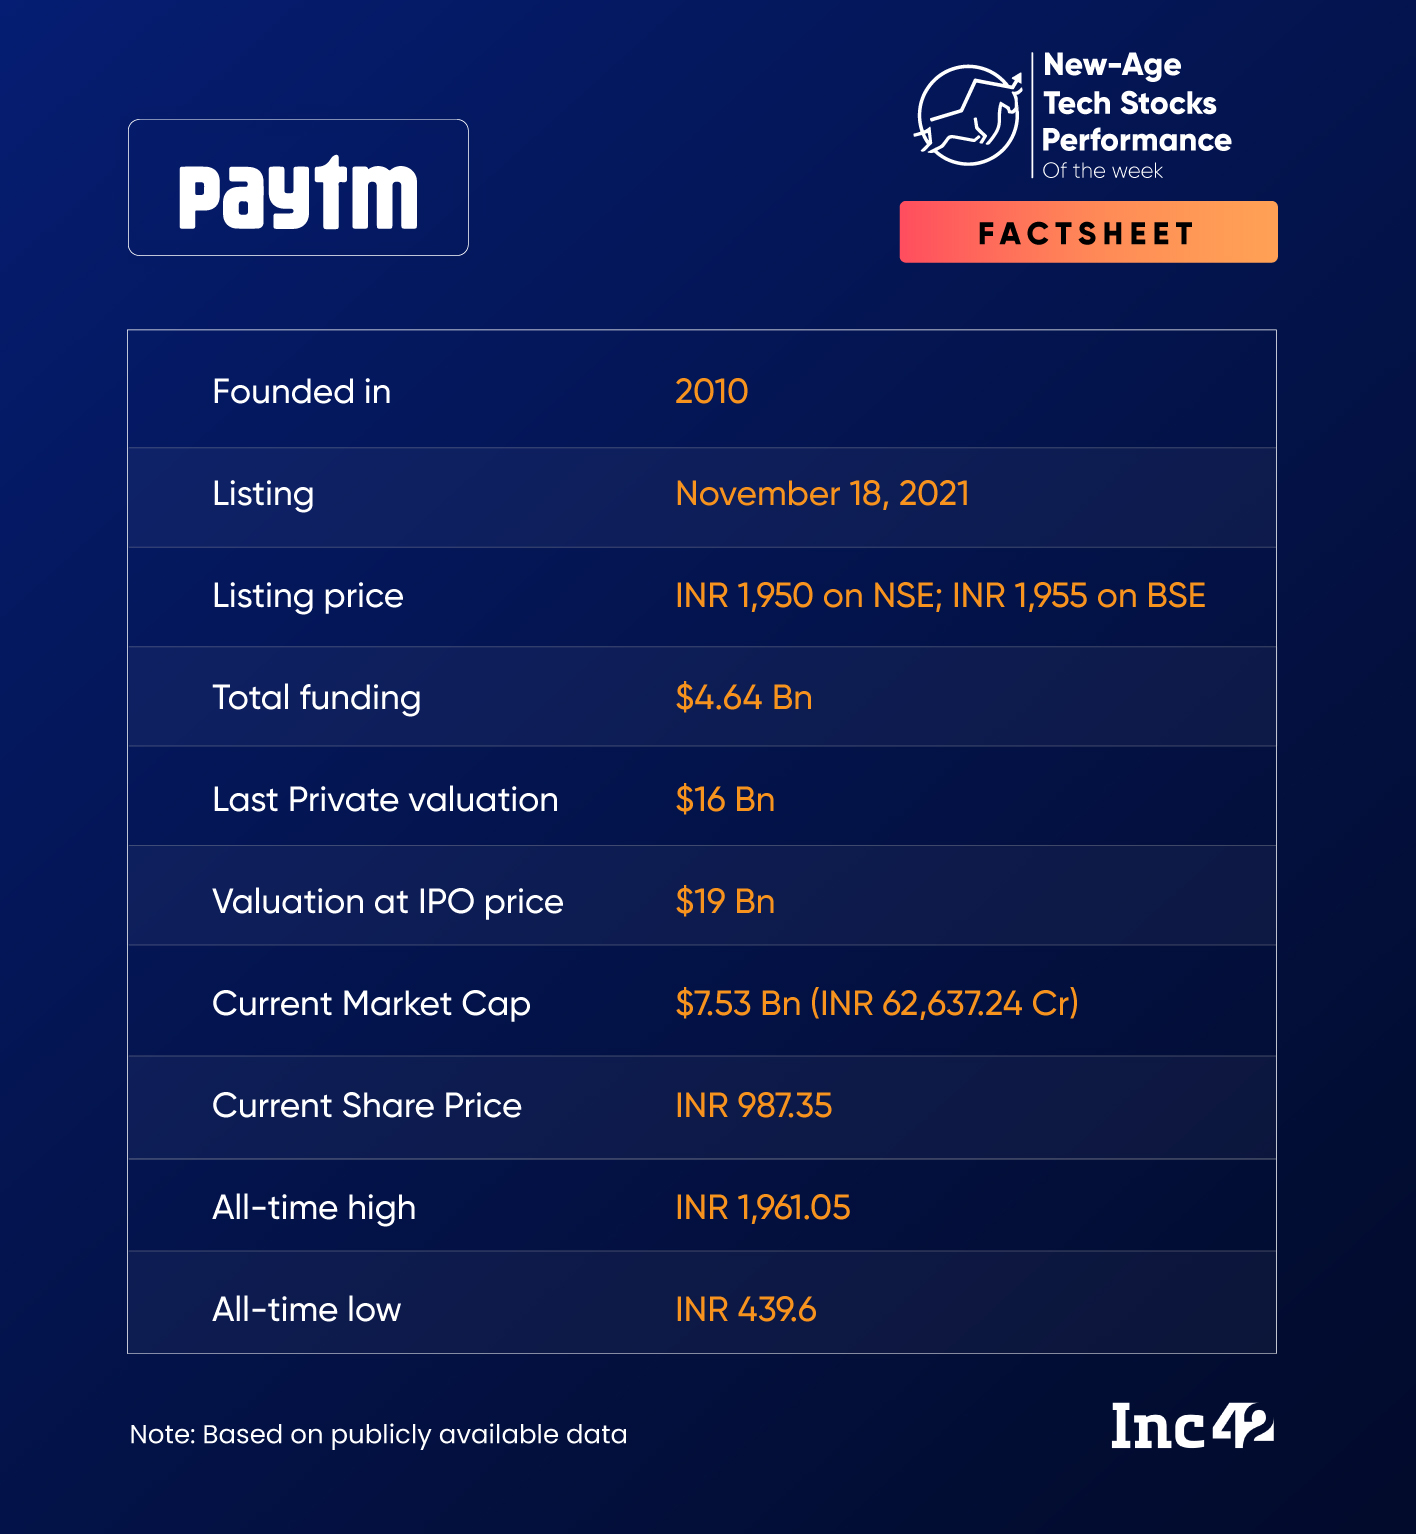 Paytm’s Strong Q2 Show